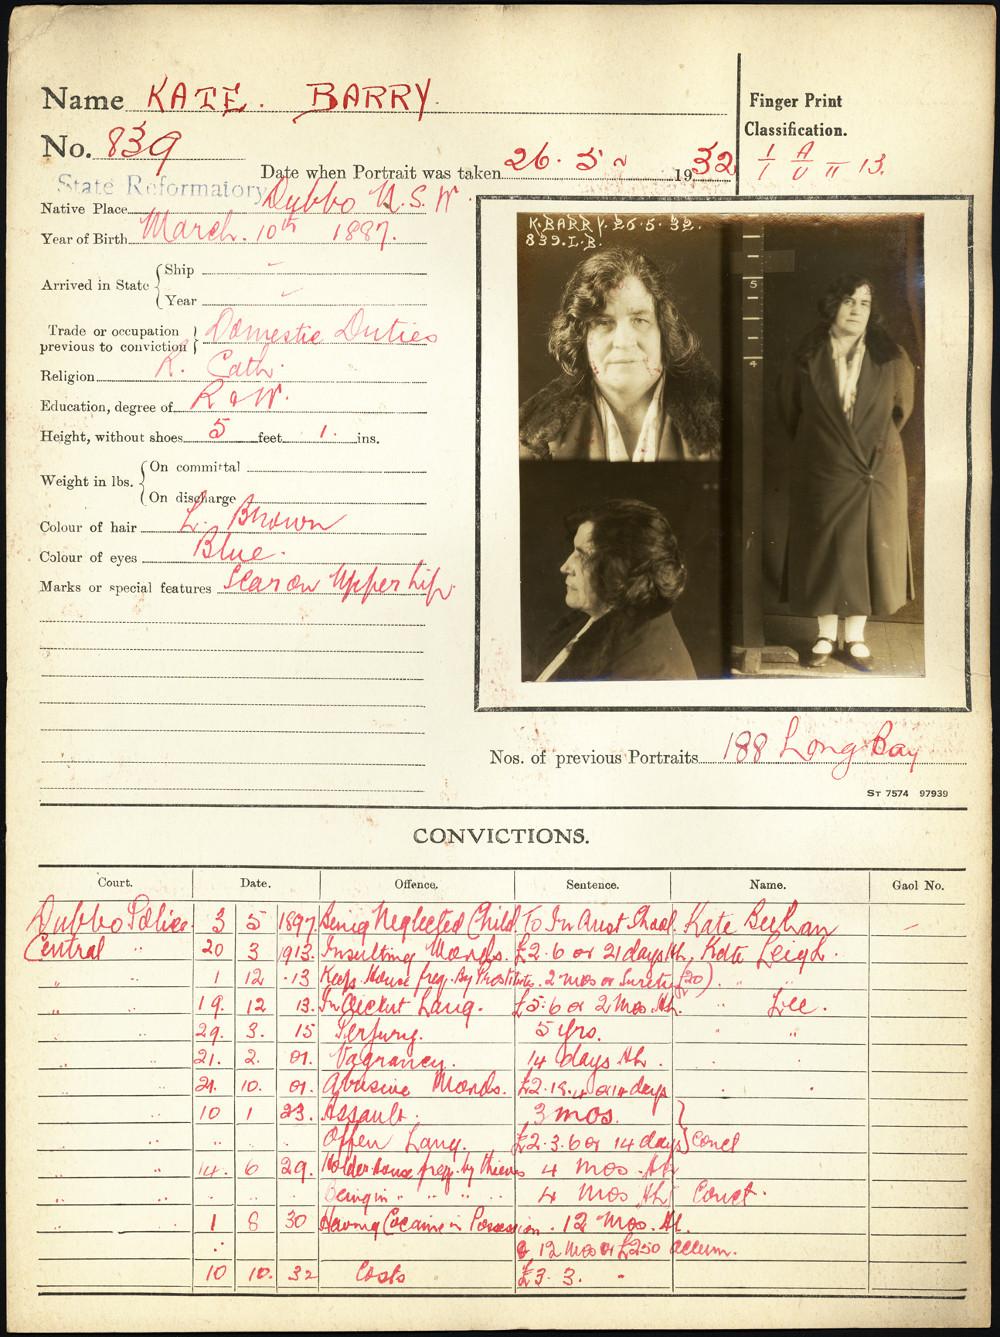 Document with the name 'Kate Barry' at the top and showing mugshots and list of convictions